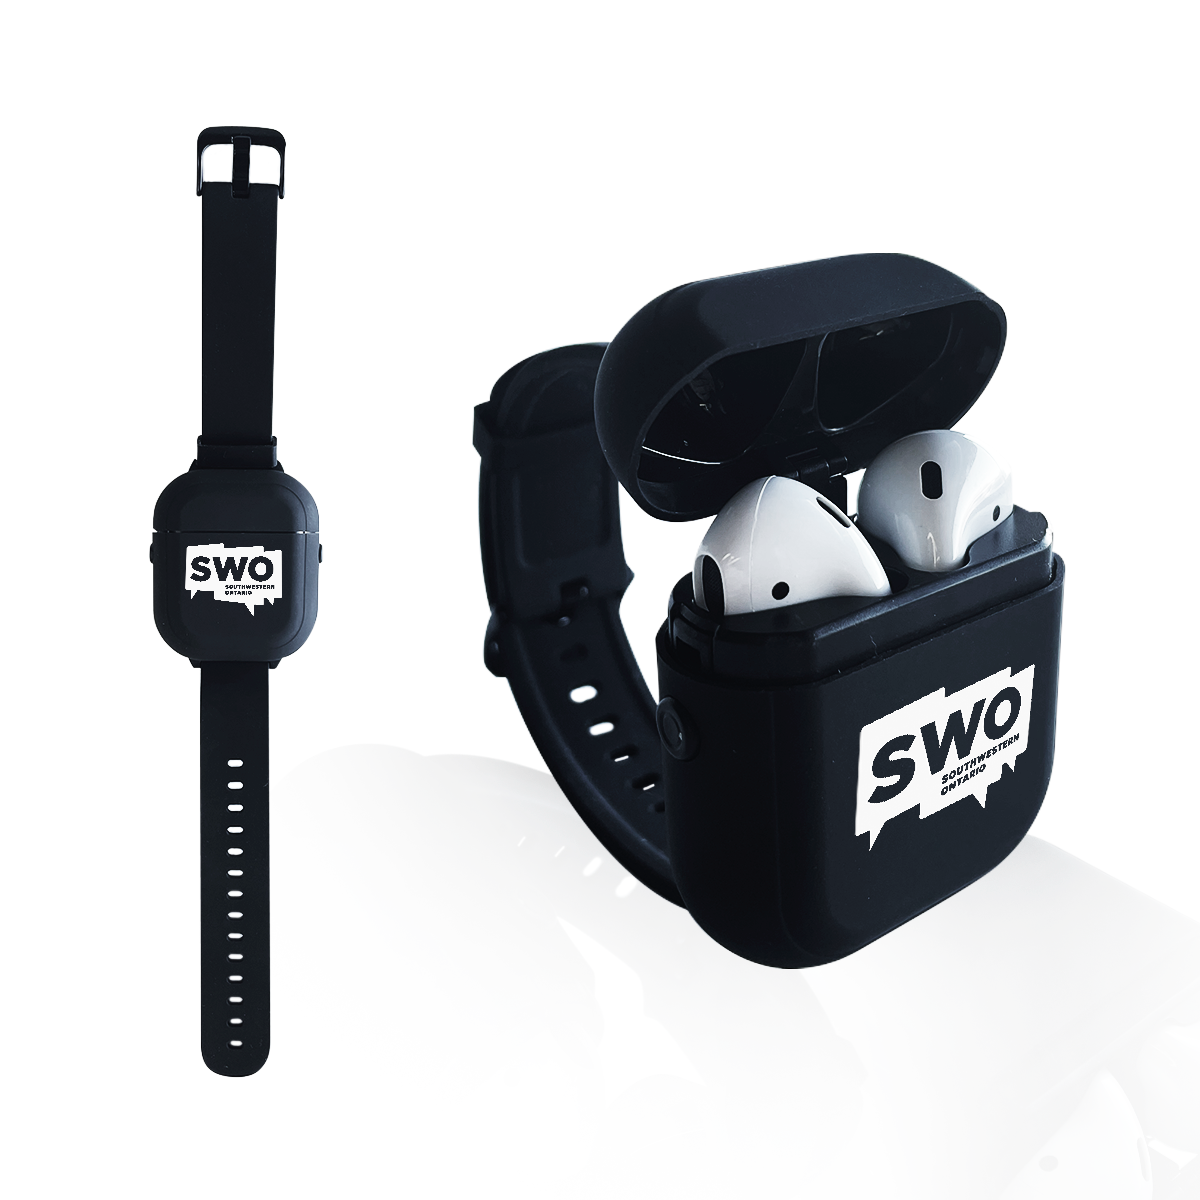 Wristband Charing Case EarBuds